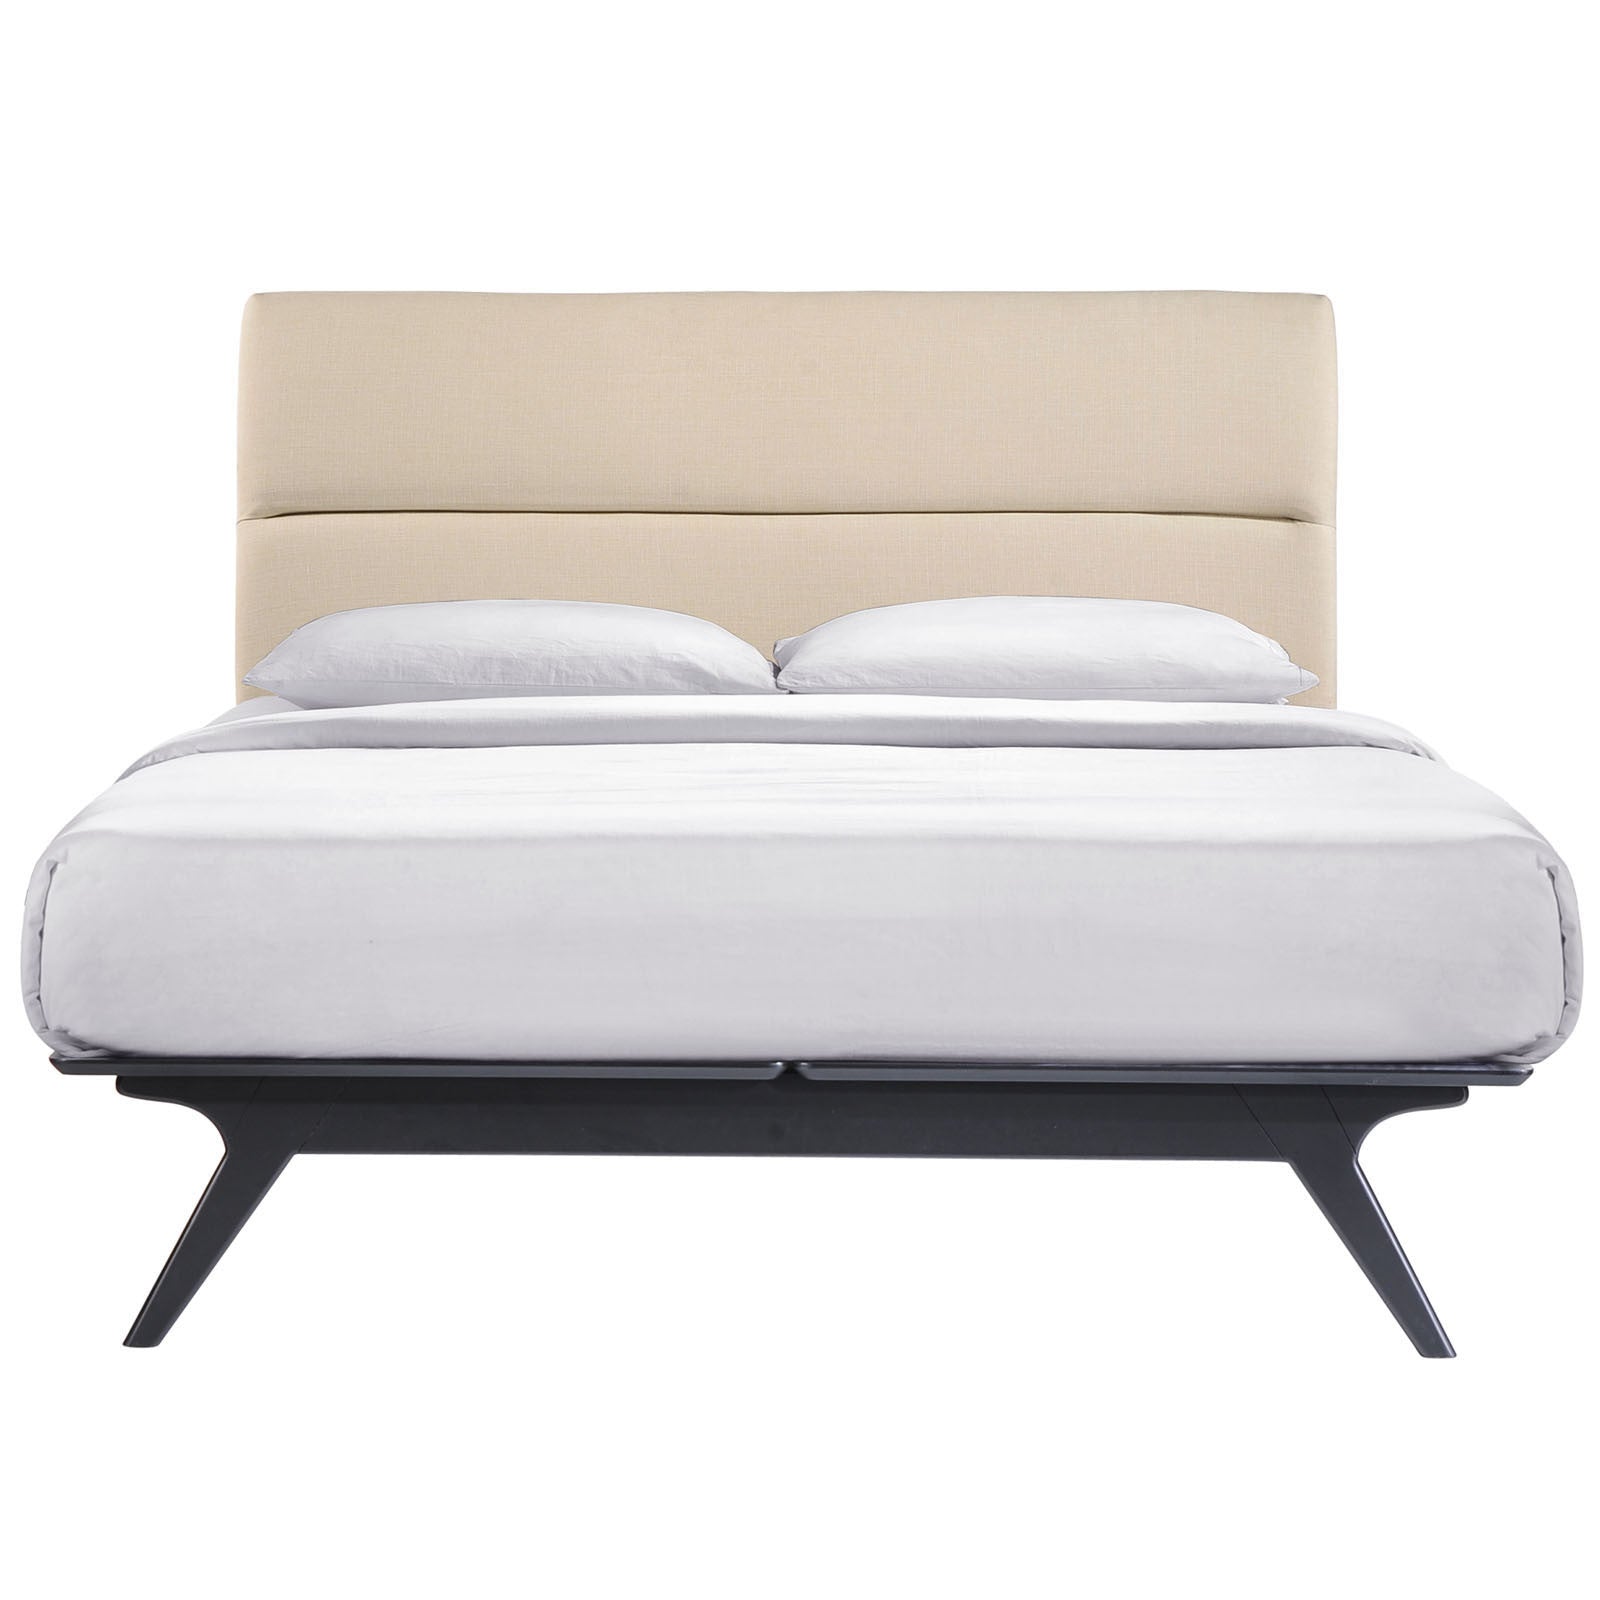 Addy Bed Beige